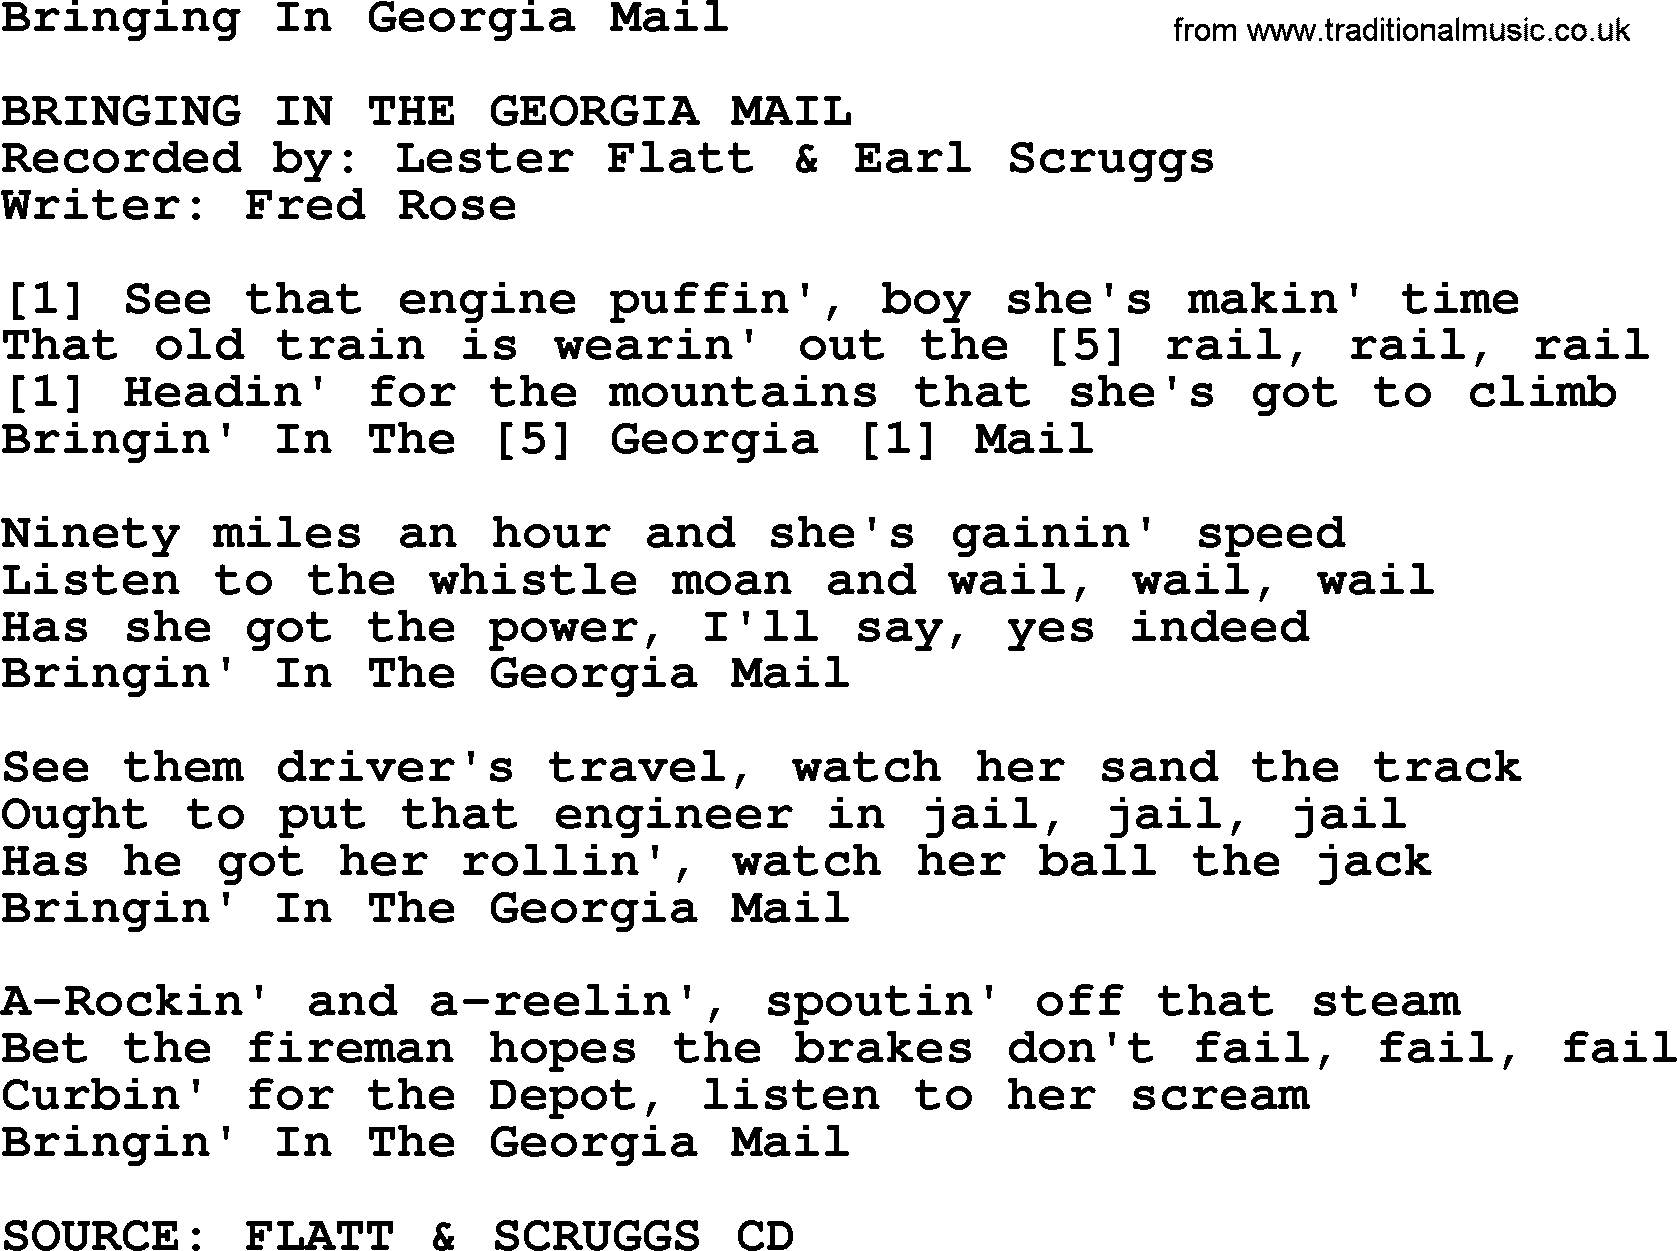 Bluegrass song: Bringing In Georgia Mail, lyrics and chords